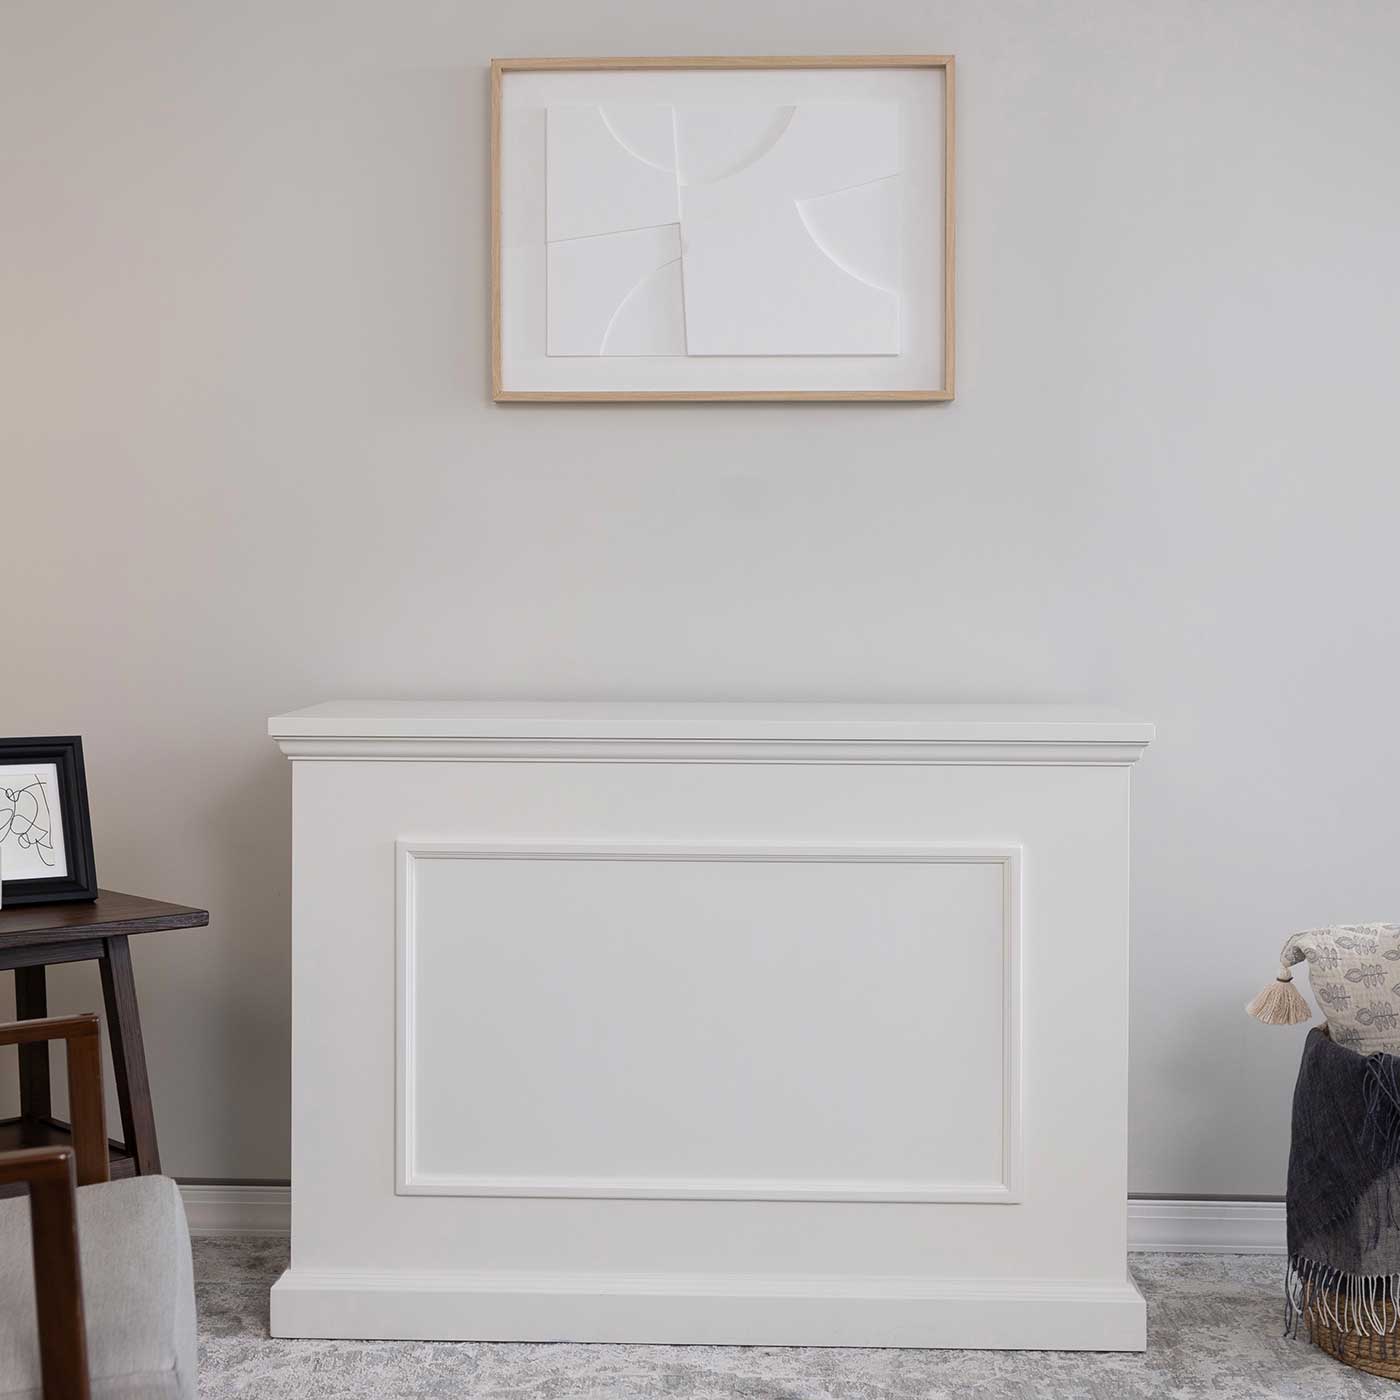 Touchstone Elevate 72015 TV Lift Cabinet in White wood finish pictured in a living room from the front. 